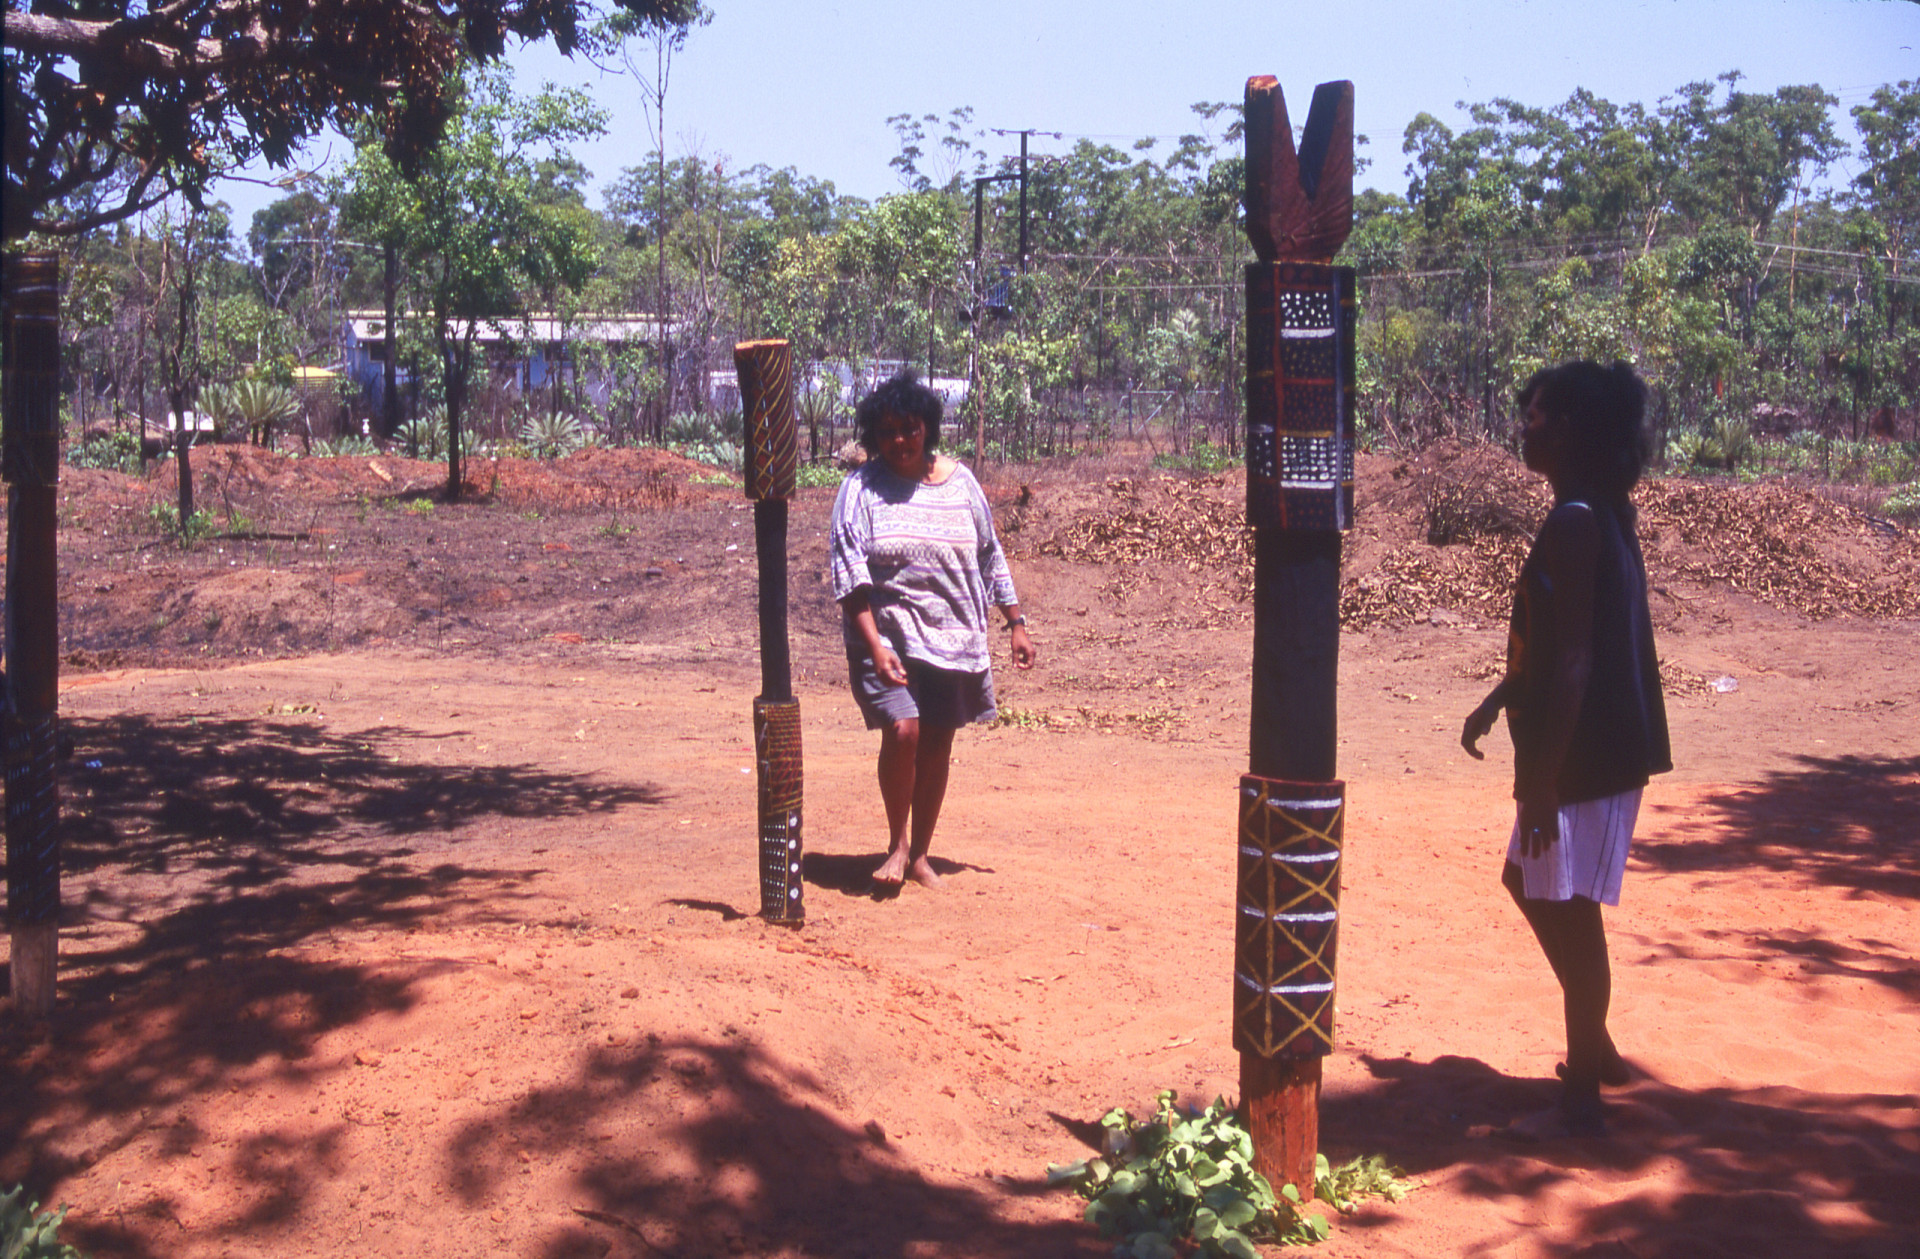 <p>In Aboriginal and Torres Strait Islander cultures, totems are believed to have spiritual significance and symbolize their roles and responsibilities to each other.</p><p>You may also like:<a href="https://www.starsinsider.com/n/386062?utm_source=msn.com&utm_medium=display&utm_campaign=referral_description&utm_content=722683en-us"> The surprising celebrity friends of politicians</a></p>